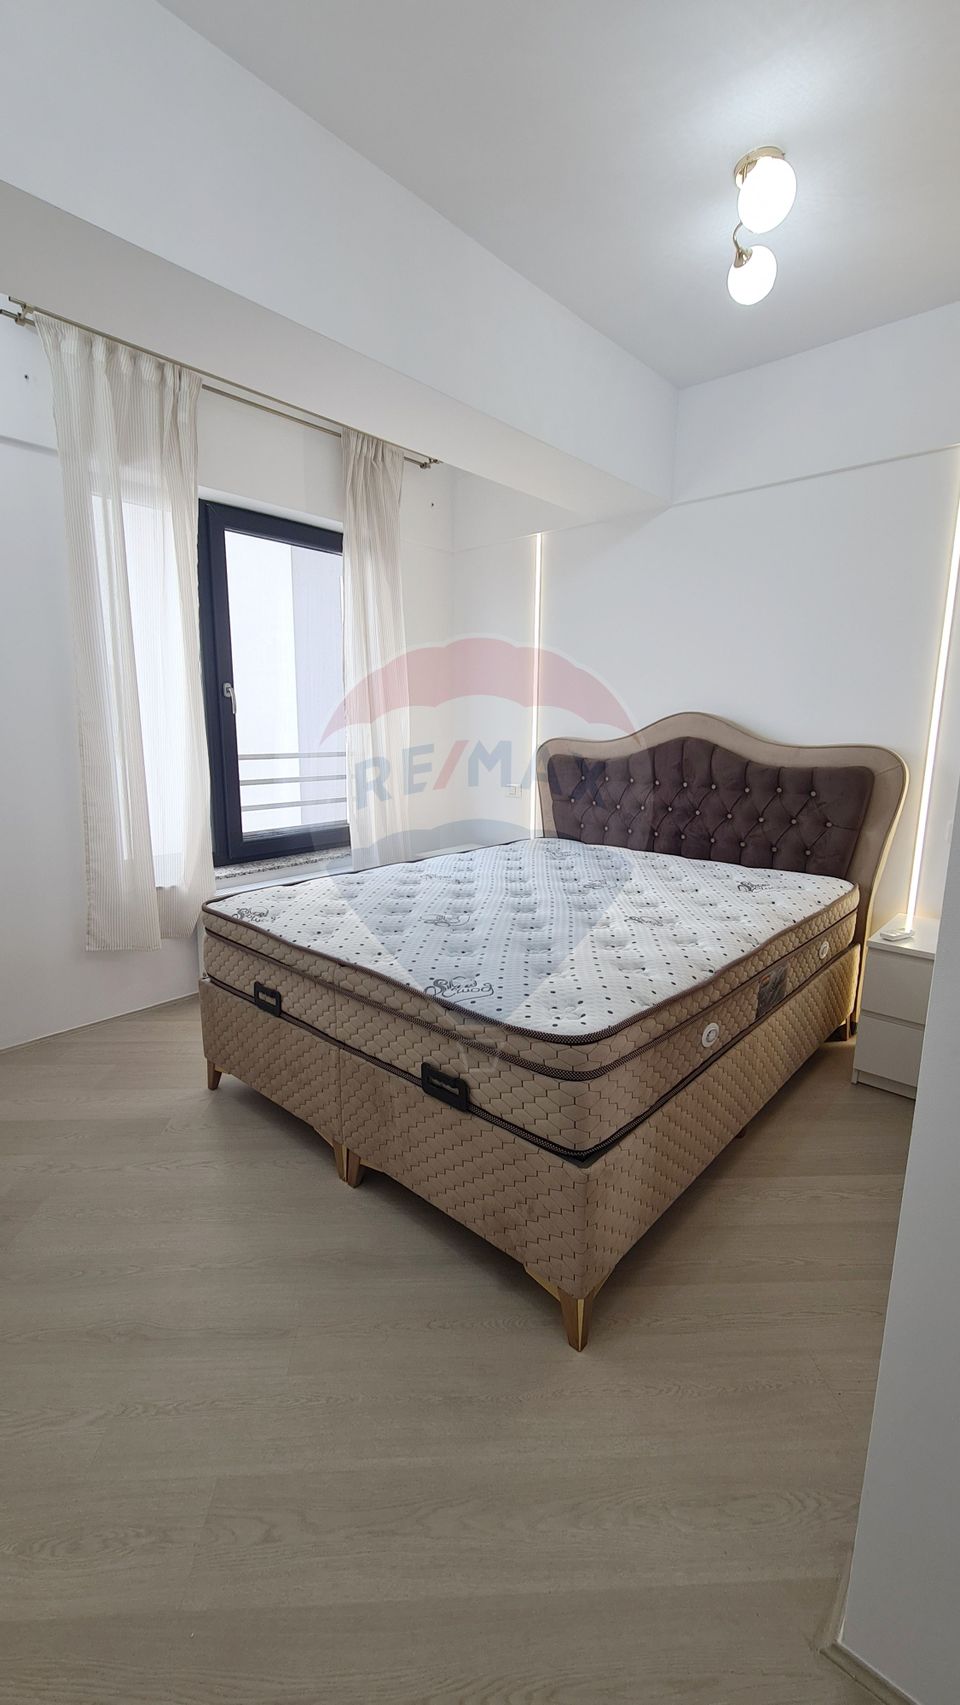 Apartment with 3 rooms - first rent - in Vacaresti area